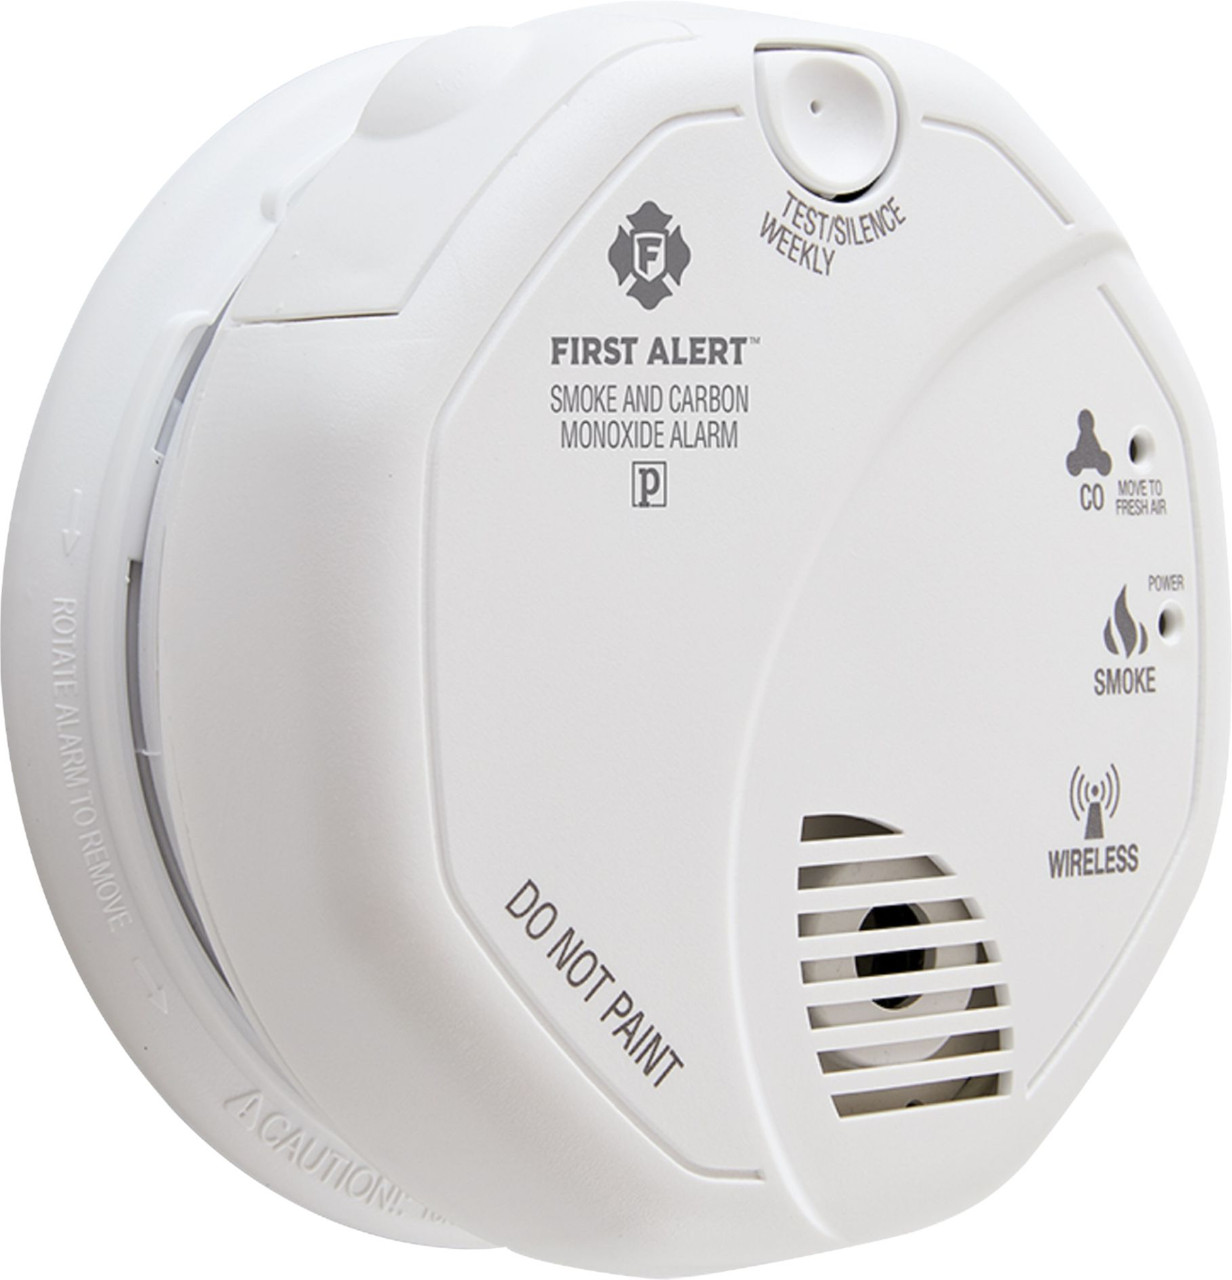 First Alert - Smoke and Carbon Monoxide Alarm - Works with Ring - White